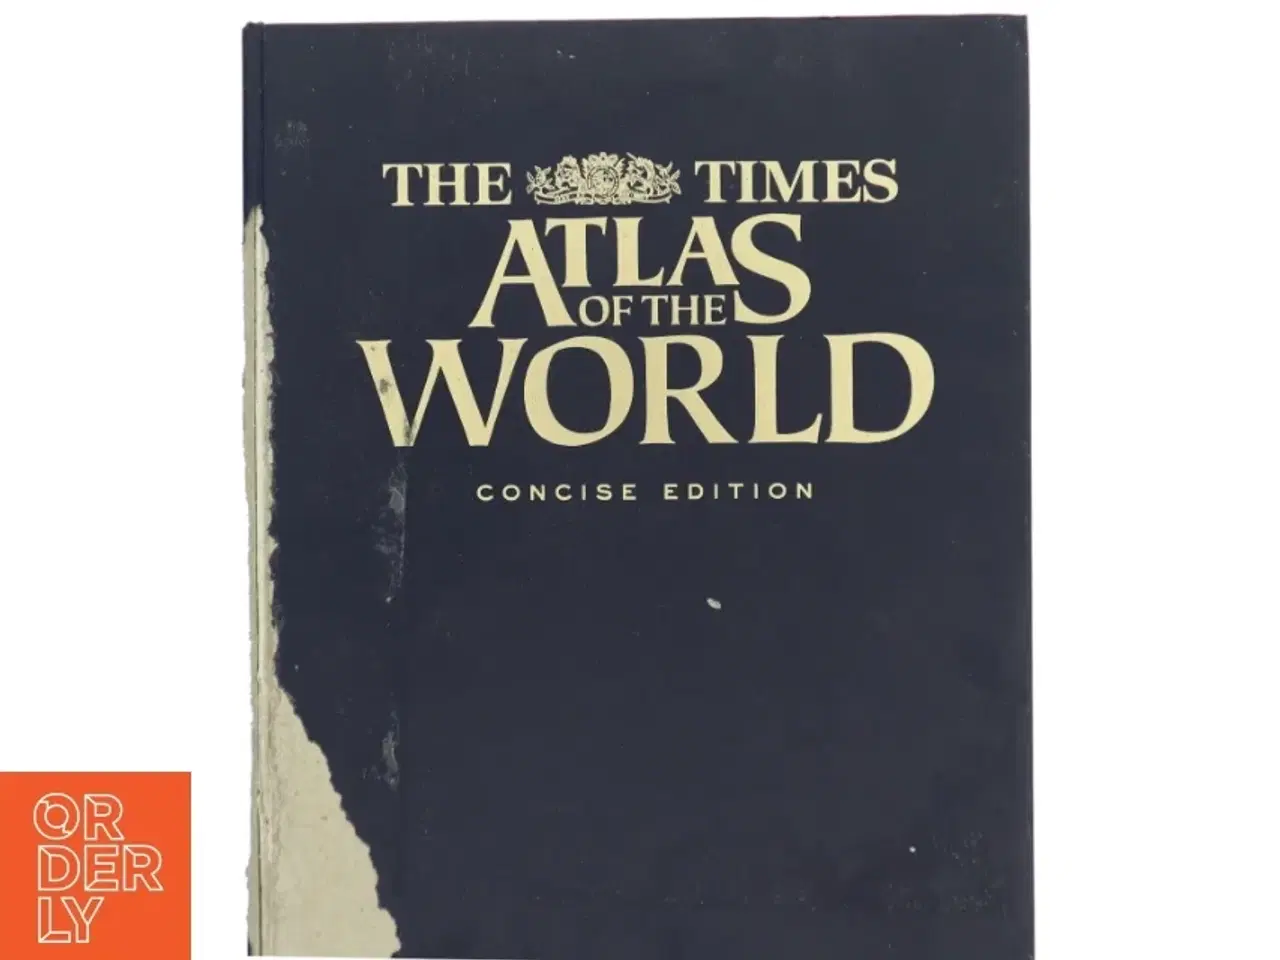 Billede 1 - The Times Atlas of the World fra The Times